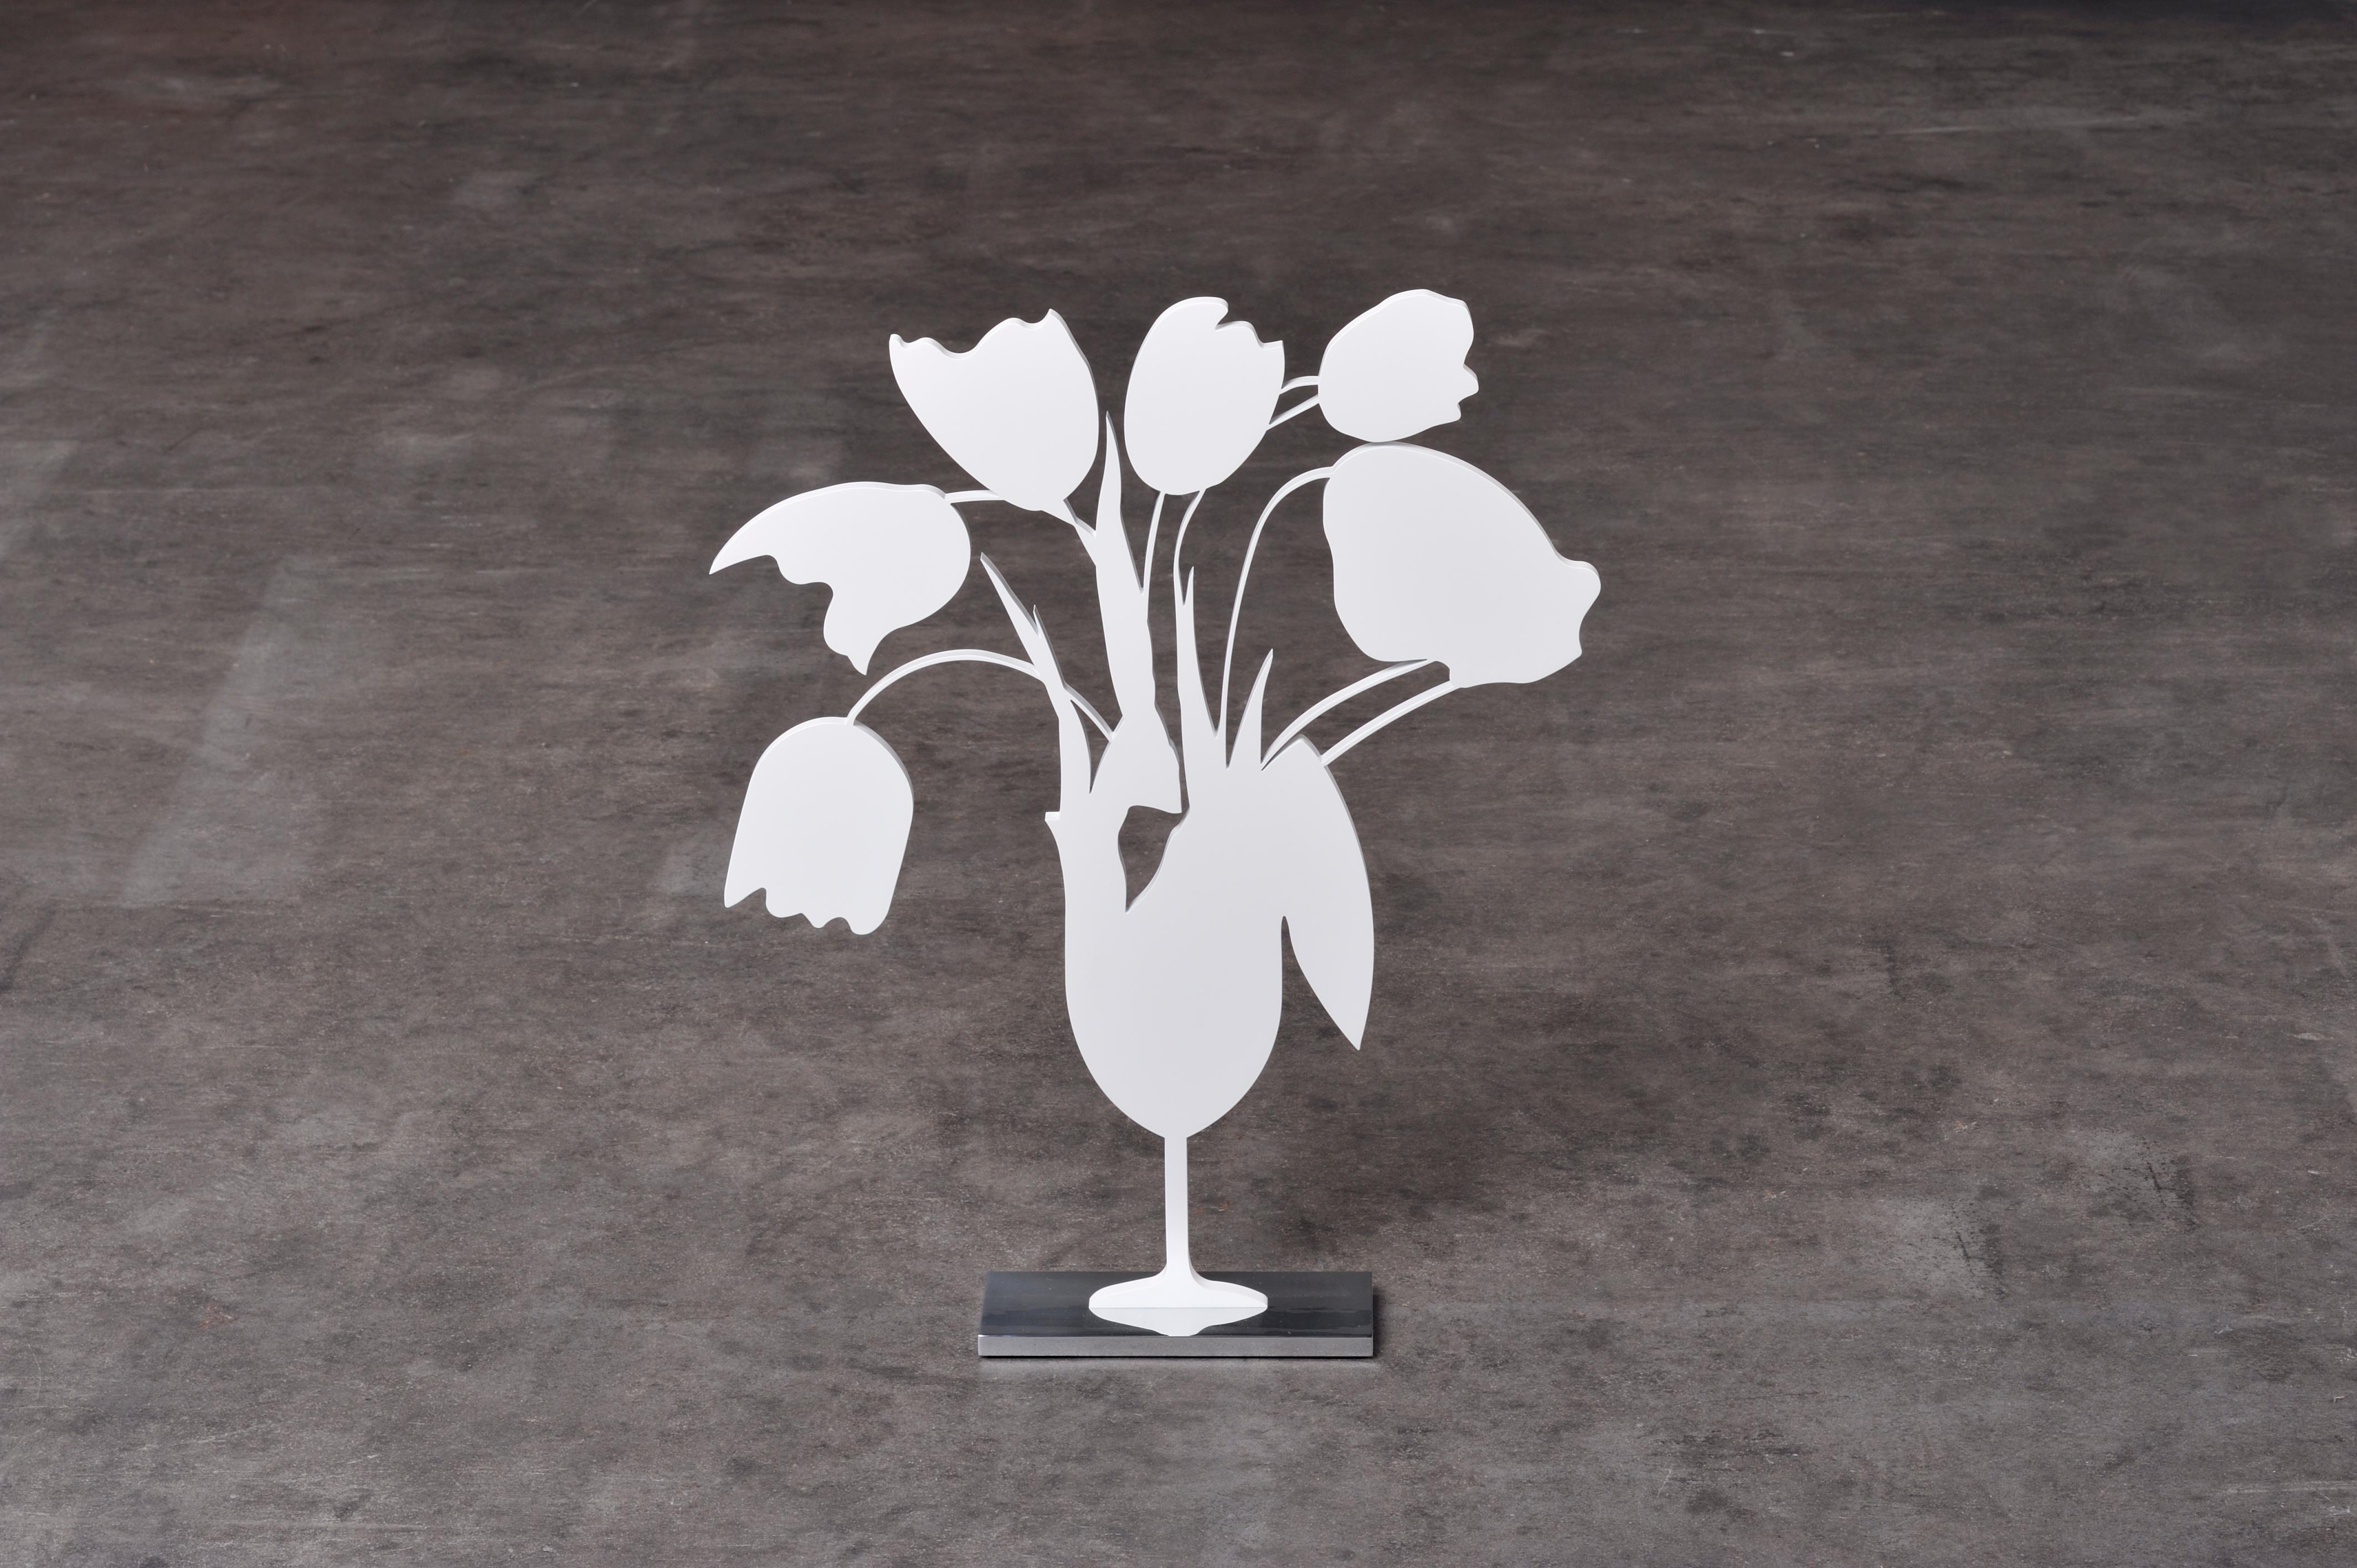 White Tulips and Vase, April 4 - Contemporary, 21st Century, Sculpture - Gray Figurative Sculpture by Donald Sultan